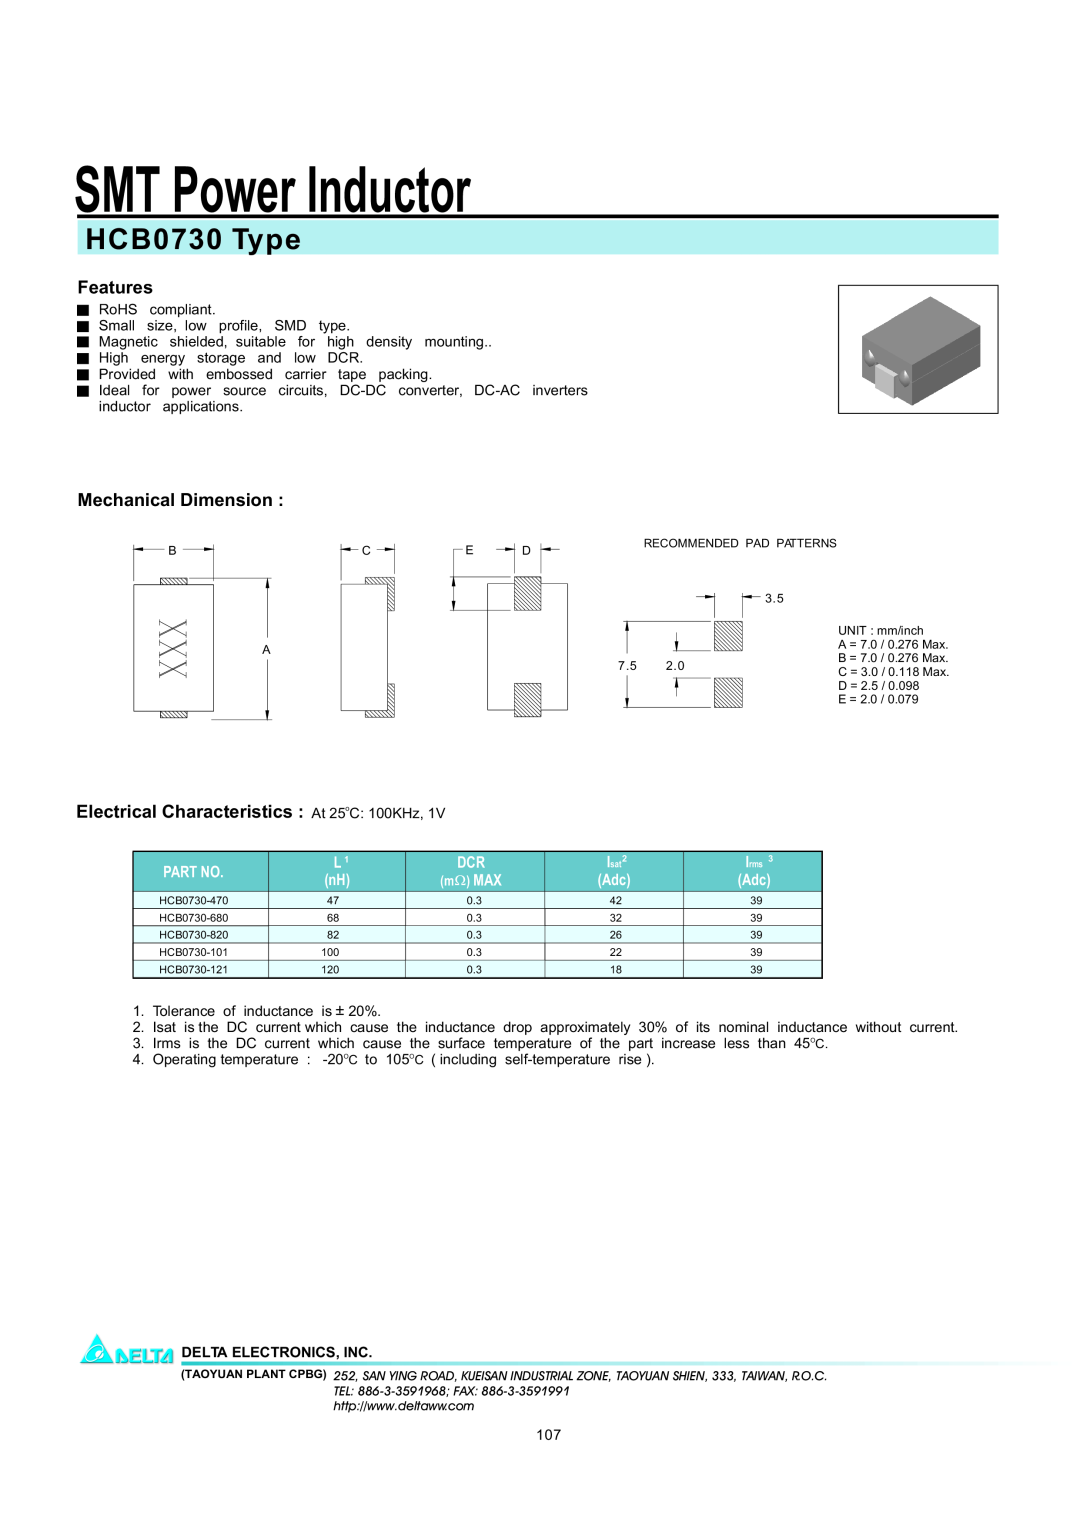 Delta Electronics manual SMT Power Inductor, HCB0730 Type, Features, Mechanical Dimension, Delta Electronics, Inc 